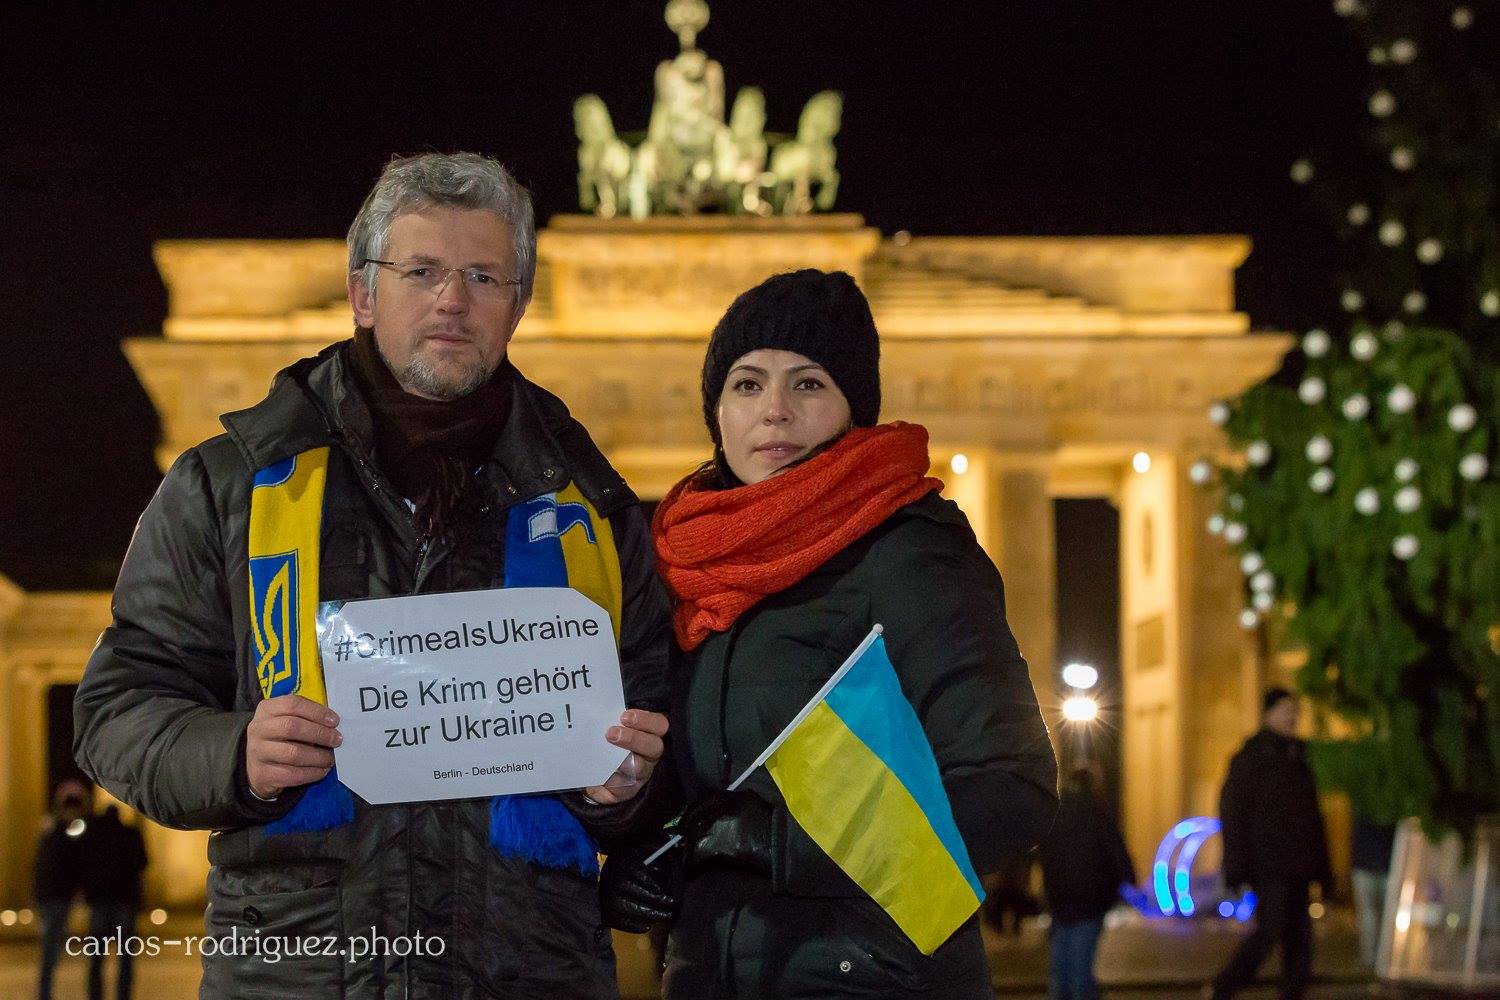 Anti-award atlas of #CrimeaIsUkraine selfies to be presented to French publisher on Christmas ~~